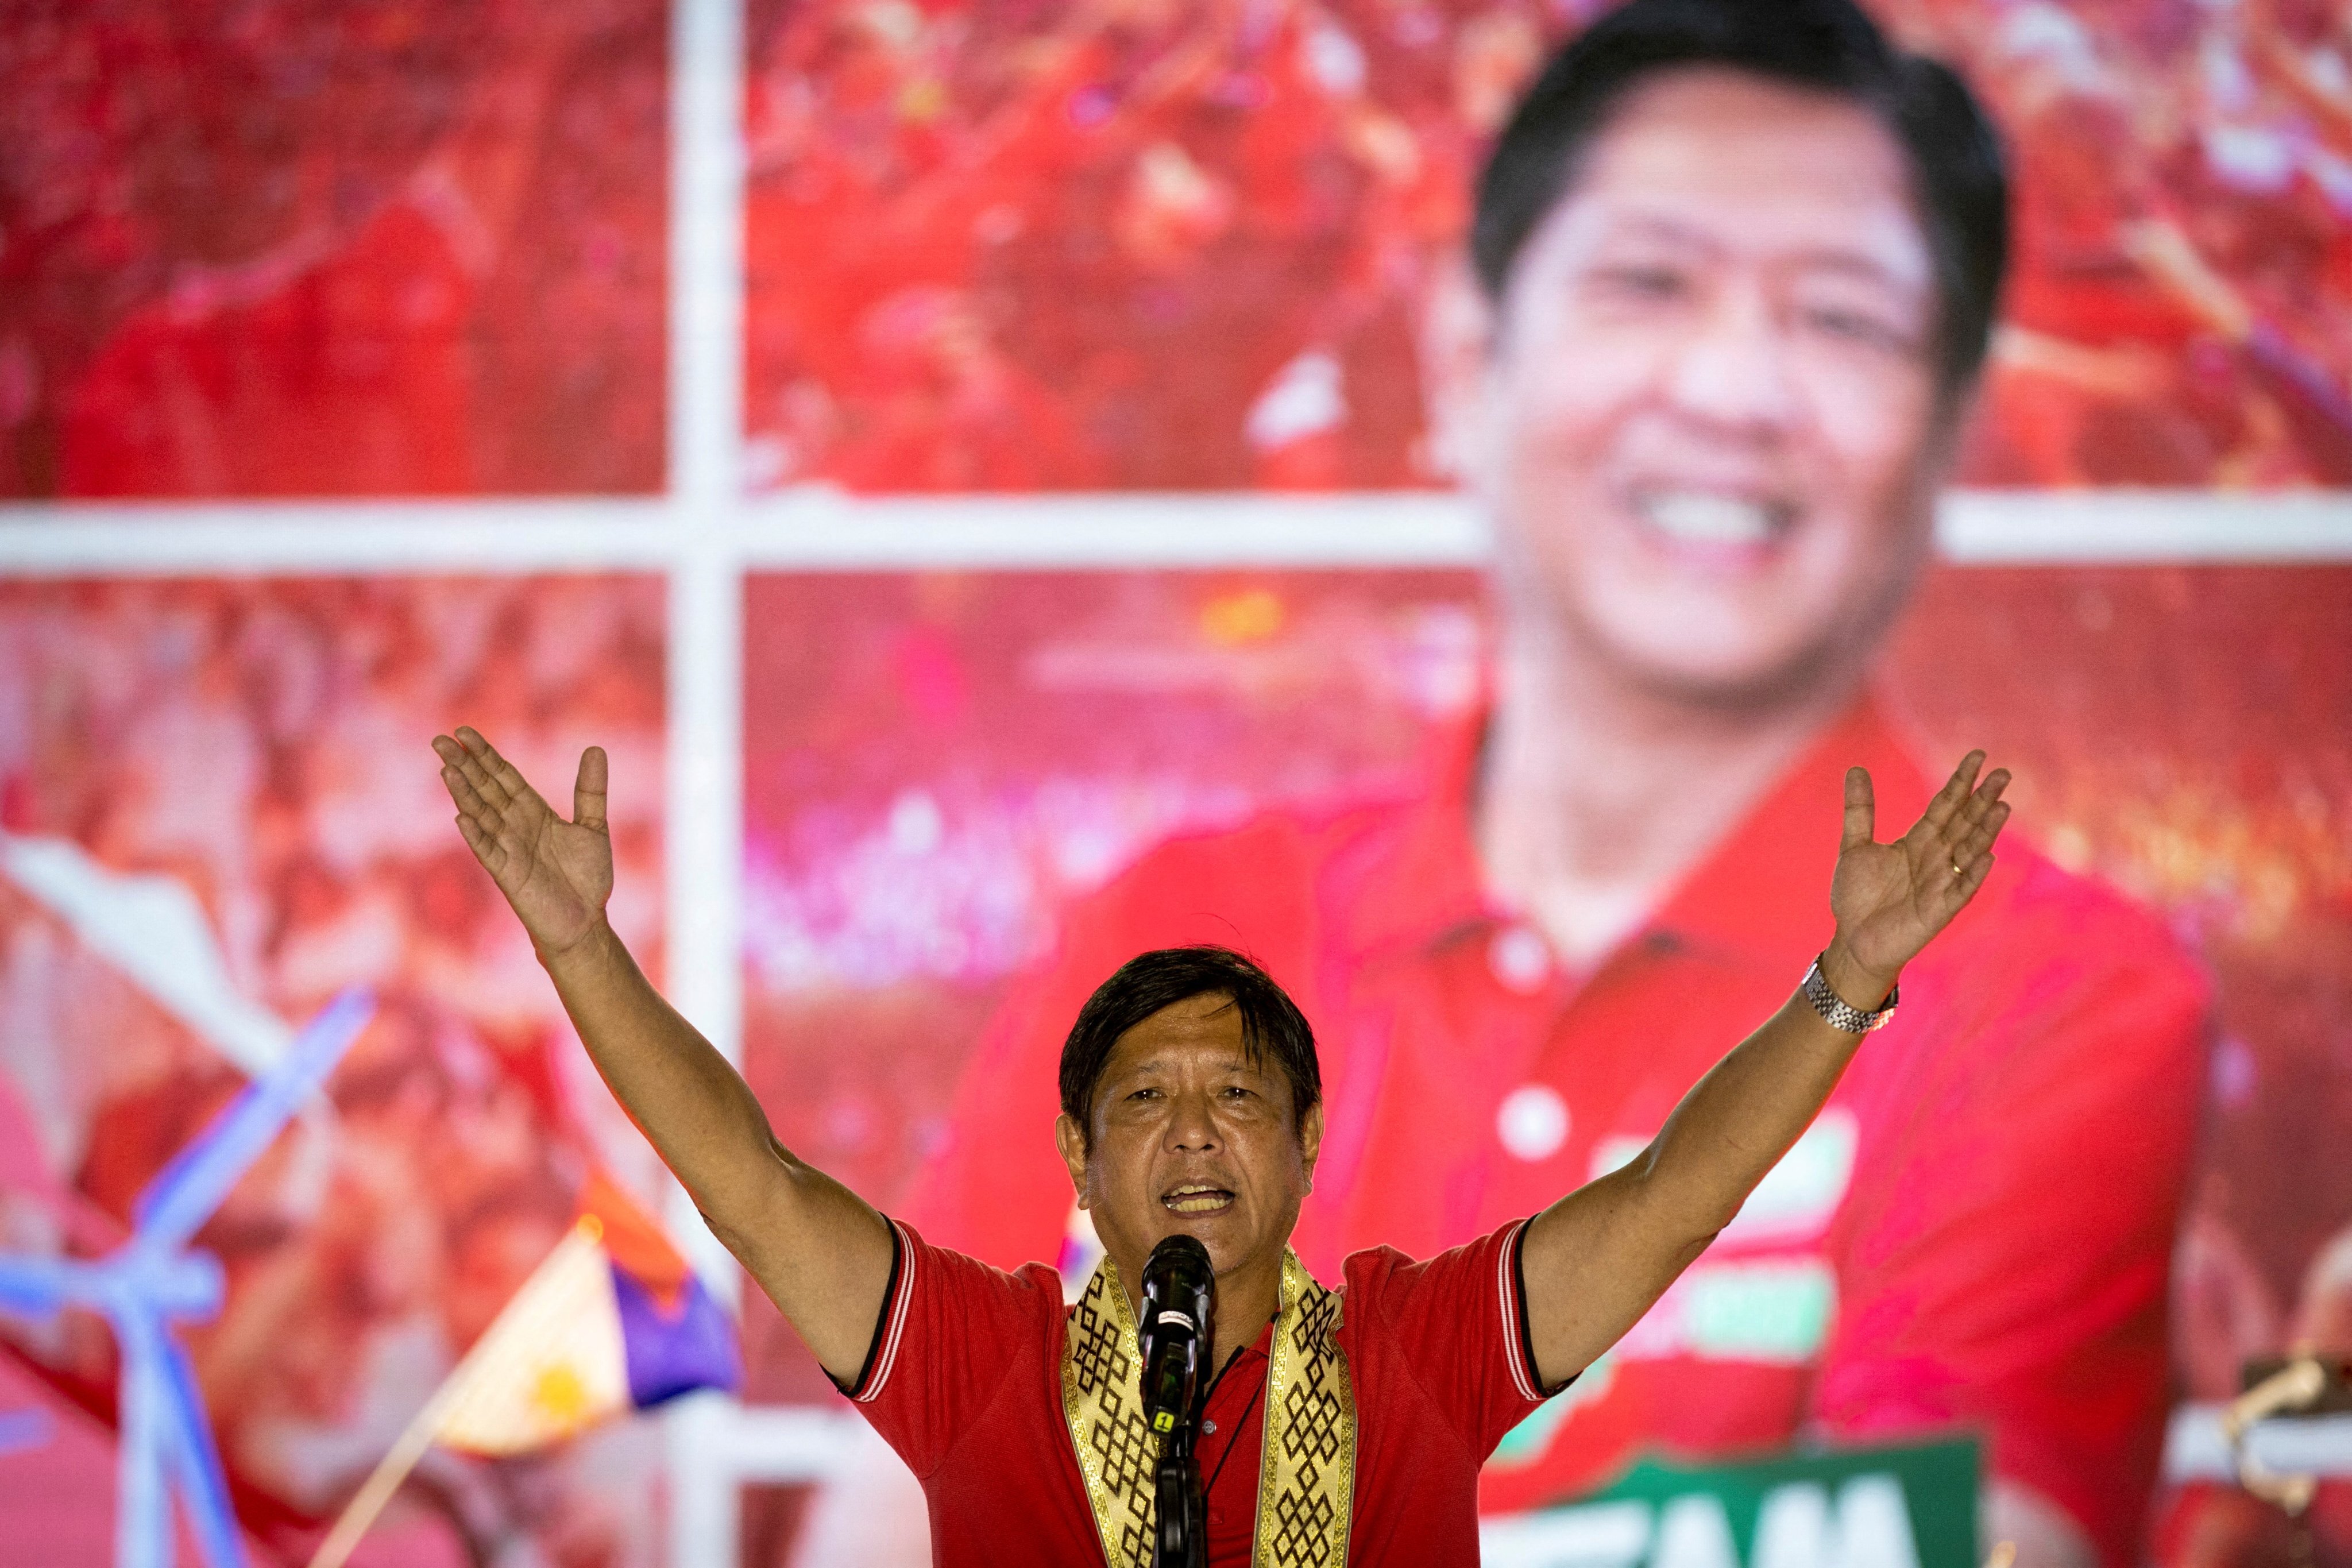 Philippine presidential candidate Ferdinand ‘Bongbong’ Marcos Jnr, son of the late dictator Ferdinand Marcos, delivers a speech during a campaign rally in Lipa, Philippines, on April 20. Photo: Reuters